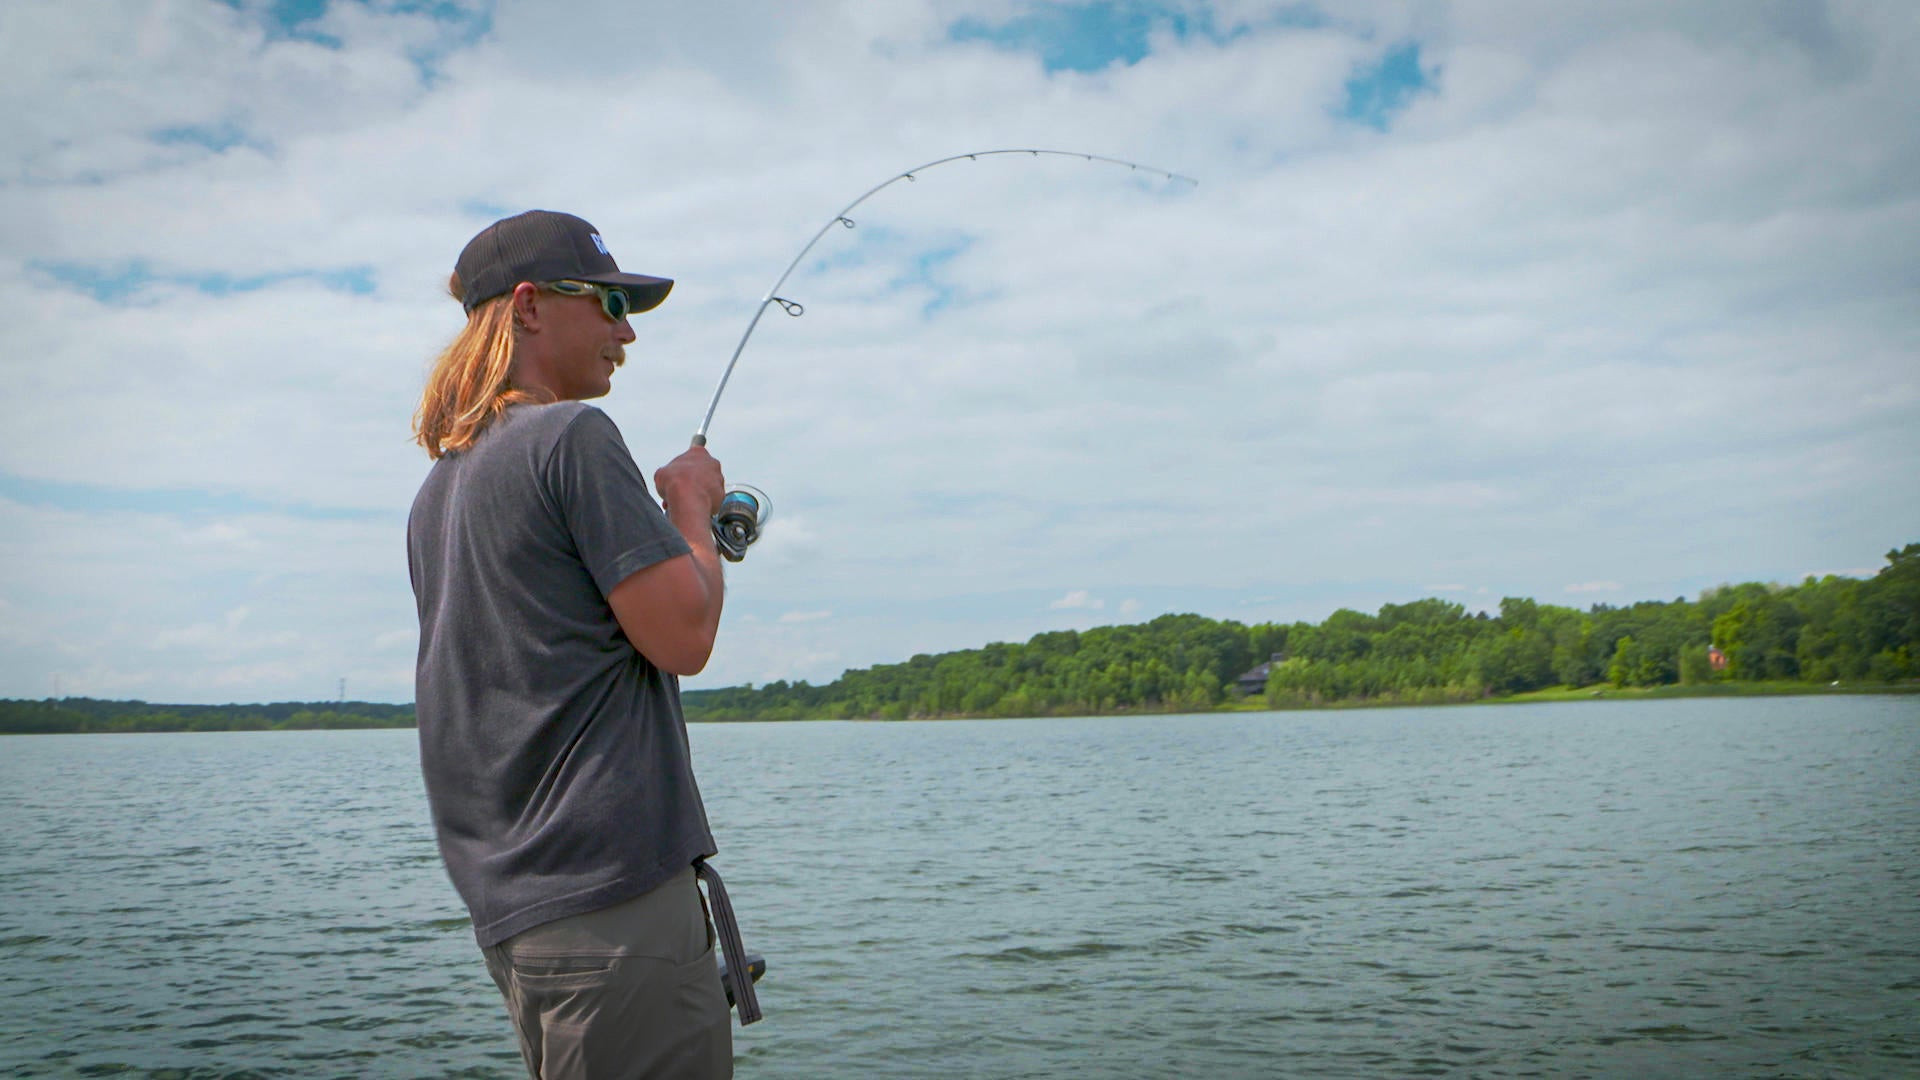 Seth Feider's Favorite Spinning Rod and Reel Combo - Wired2Fish